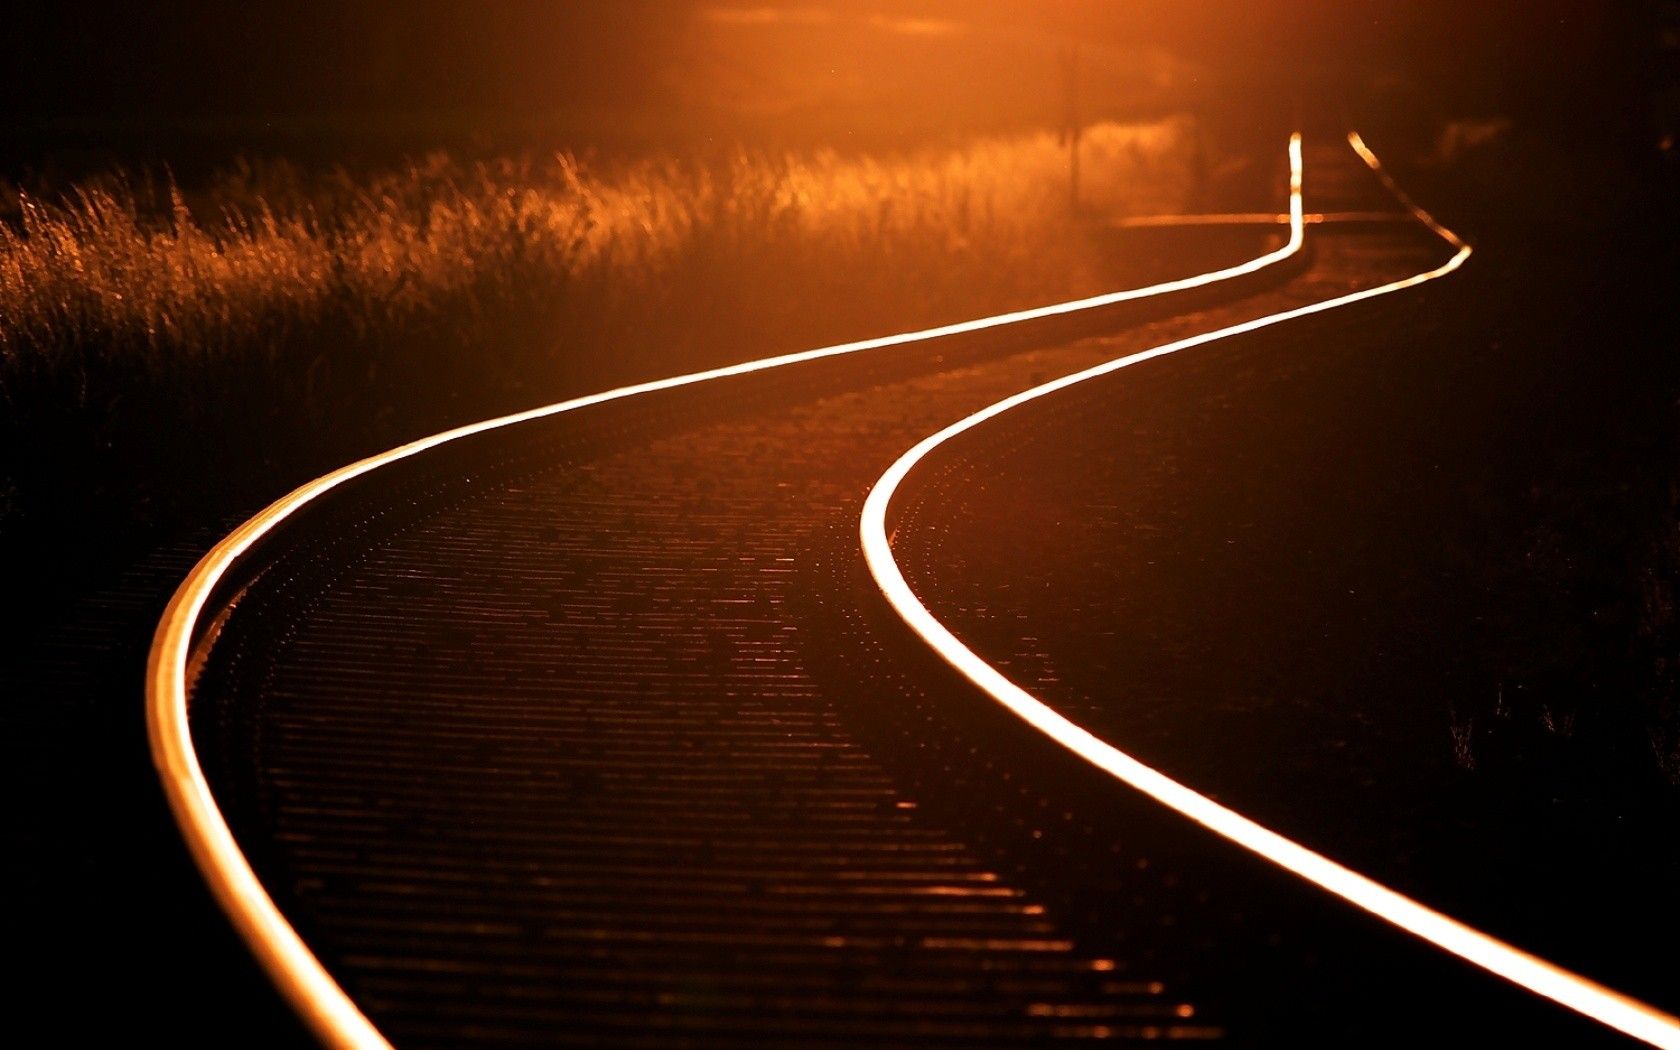 252 Railroad HD Wallpapers | Backgrounds - Wallpaper Abyss